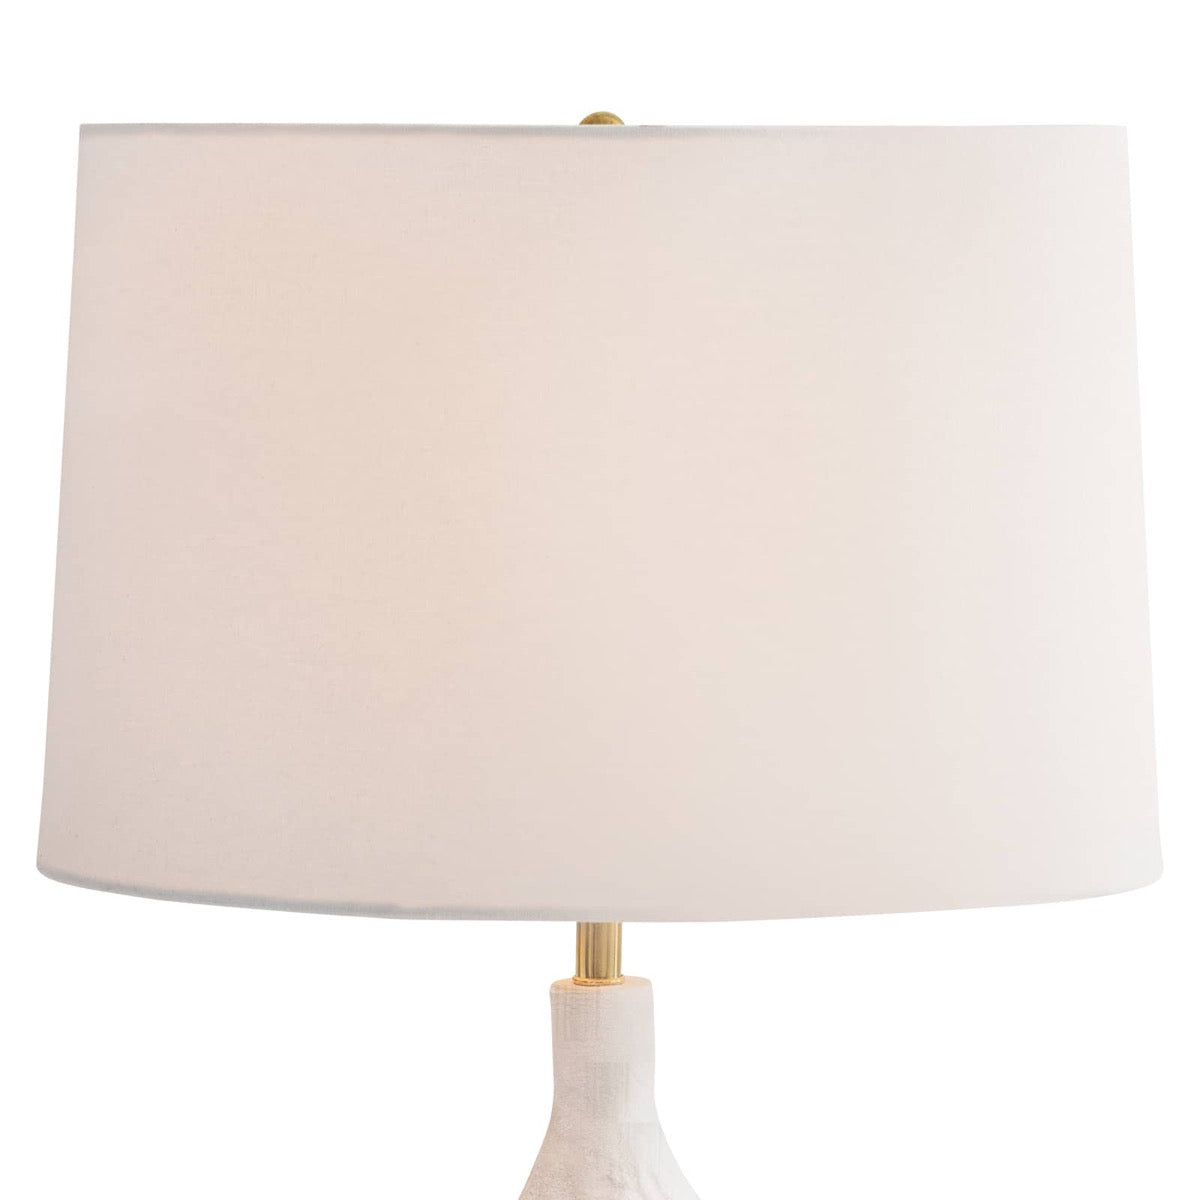 Viva Table Lamp. Front view.